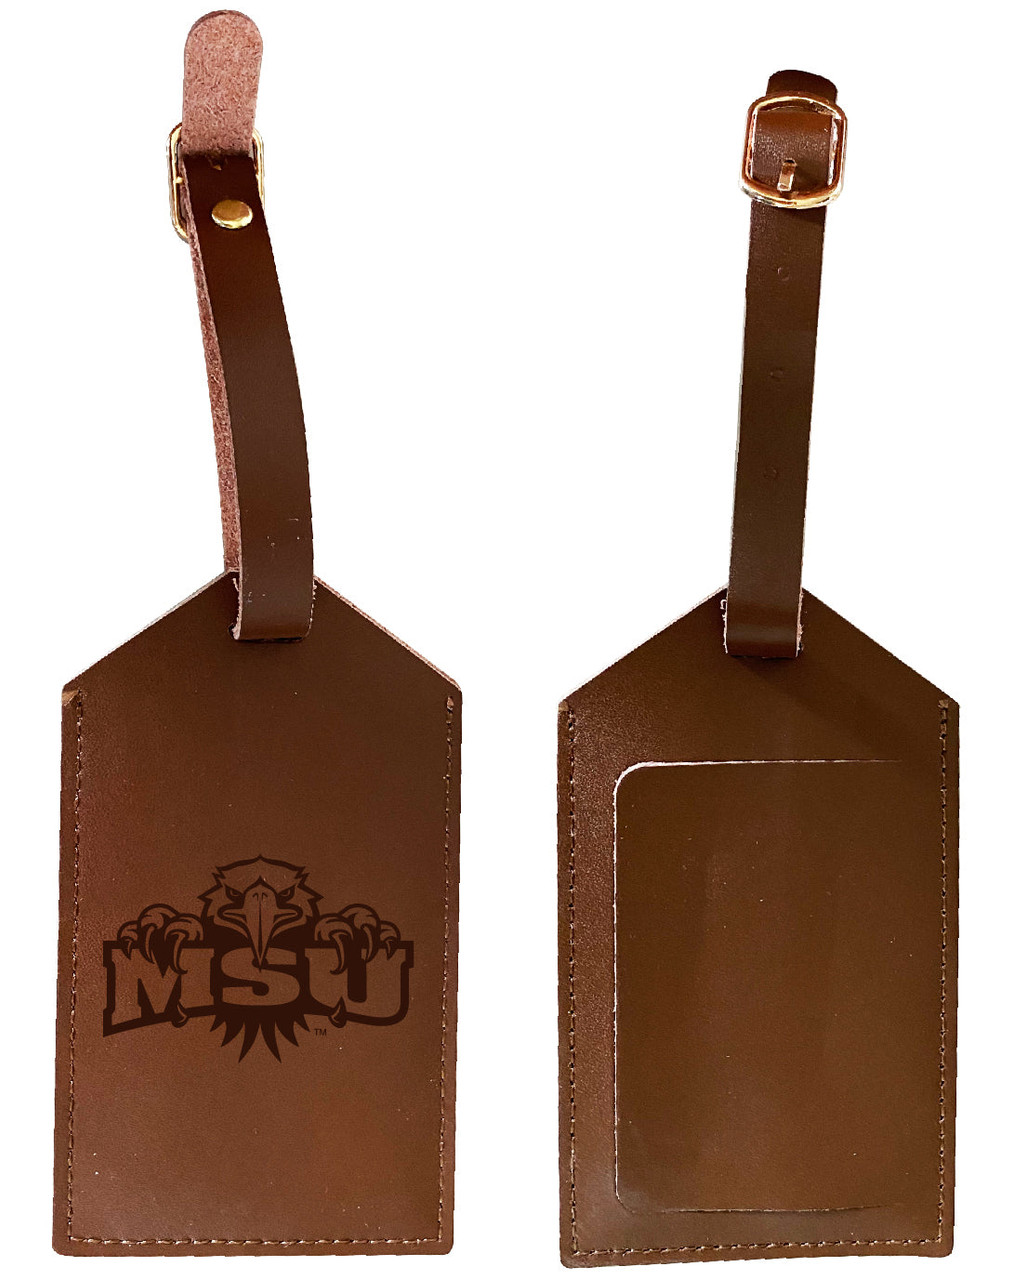 Morehead State University Leather Luggage Tag Engraved